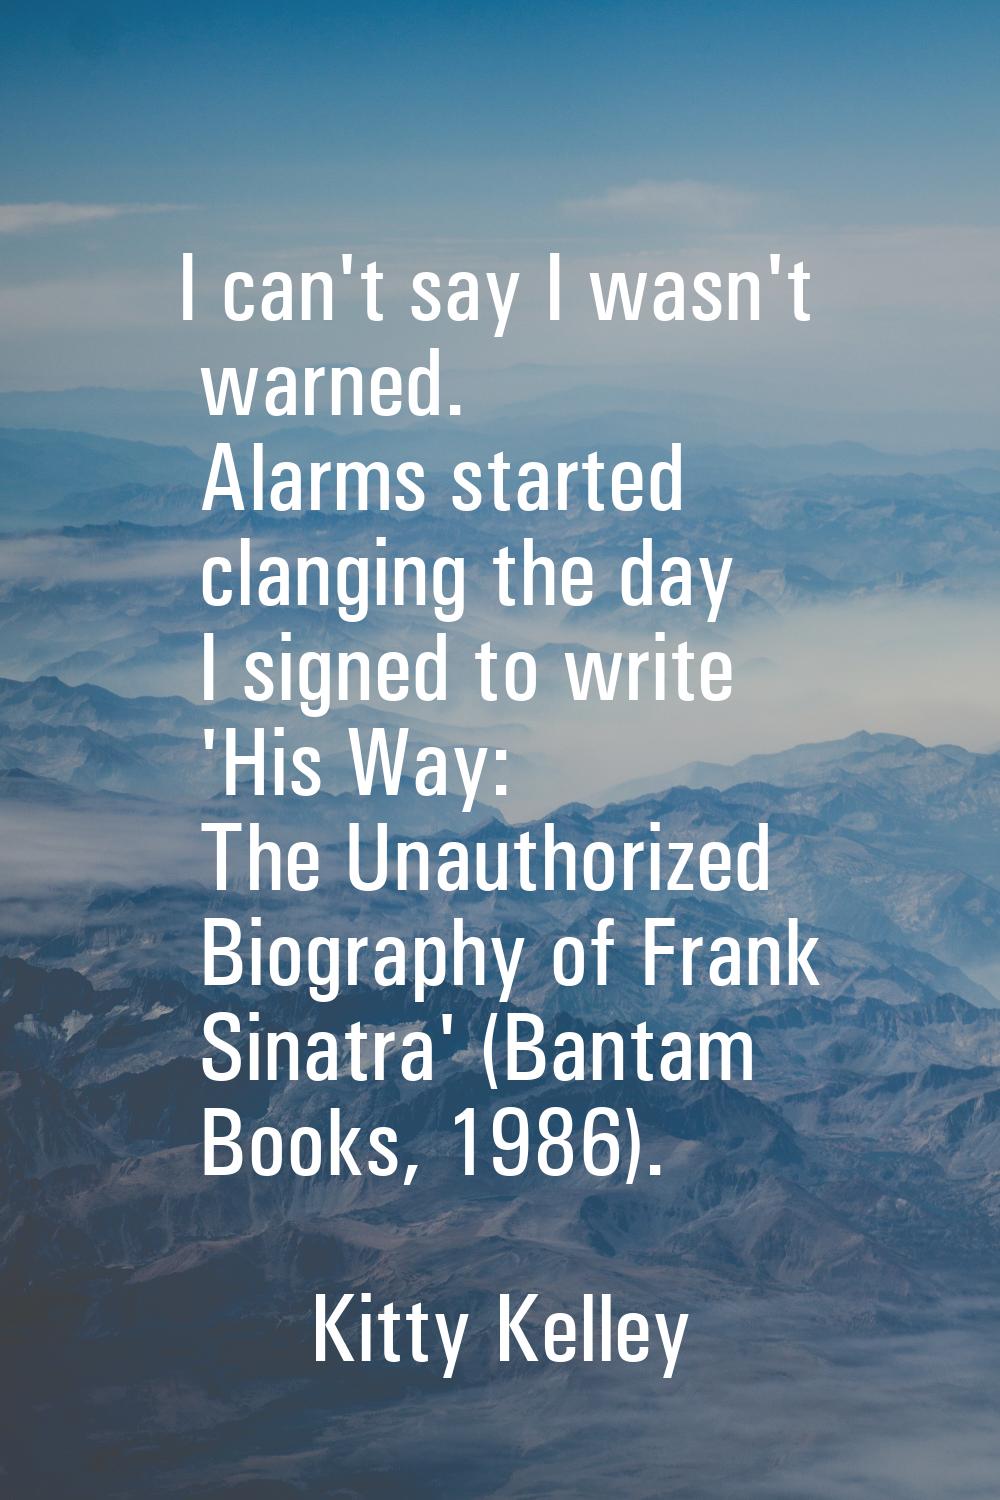 I can't say I wasn't warned. Alarms started clanging the day I signed to write 'His Way: The Unauth